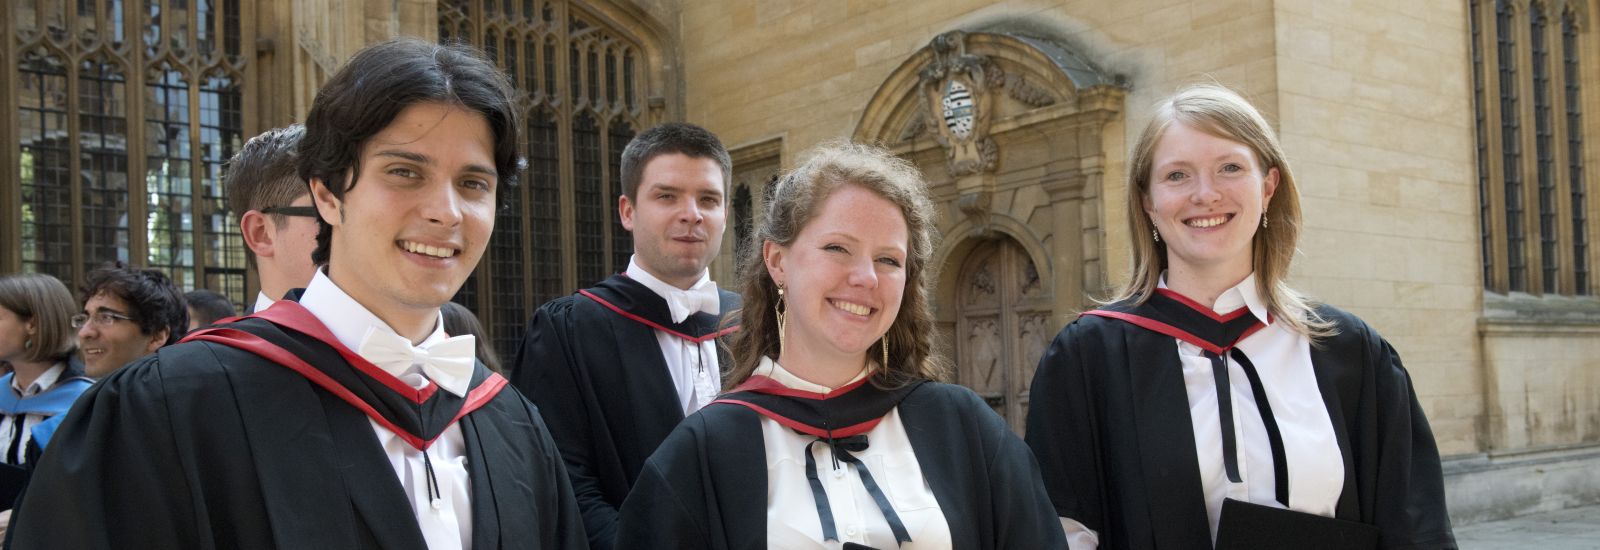 masters in education at oxford university